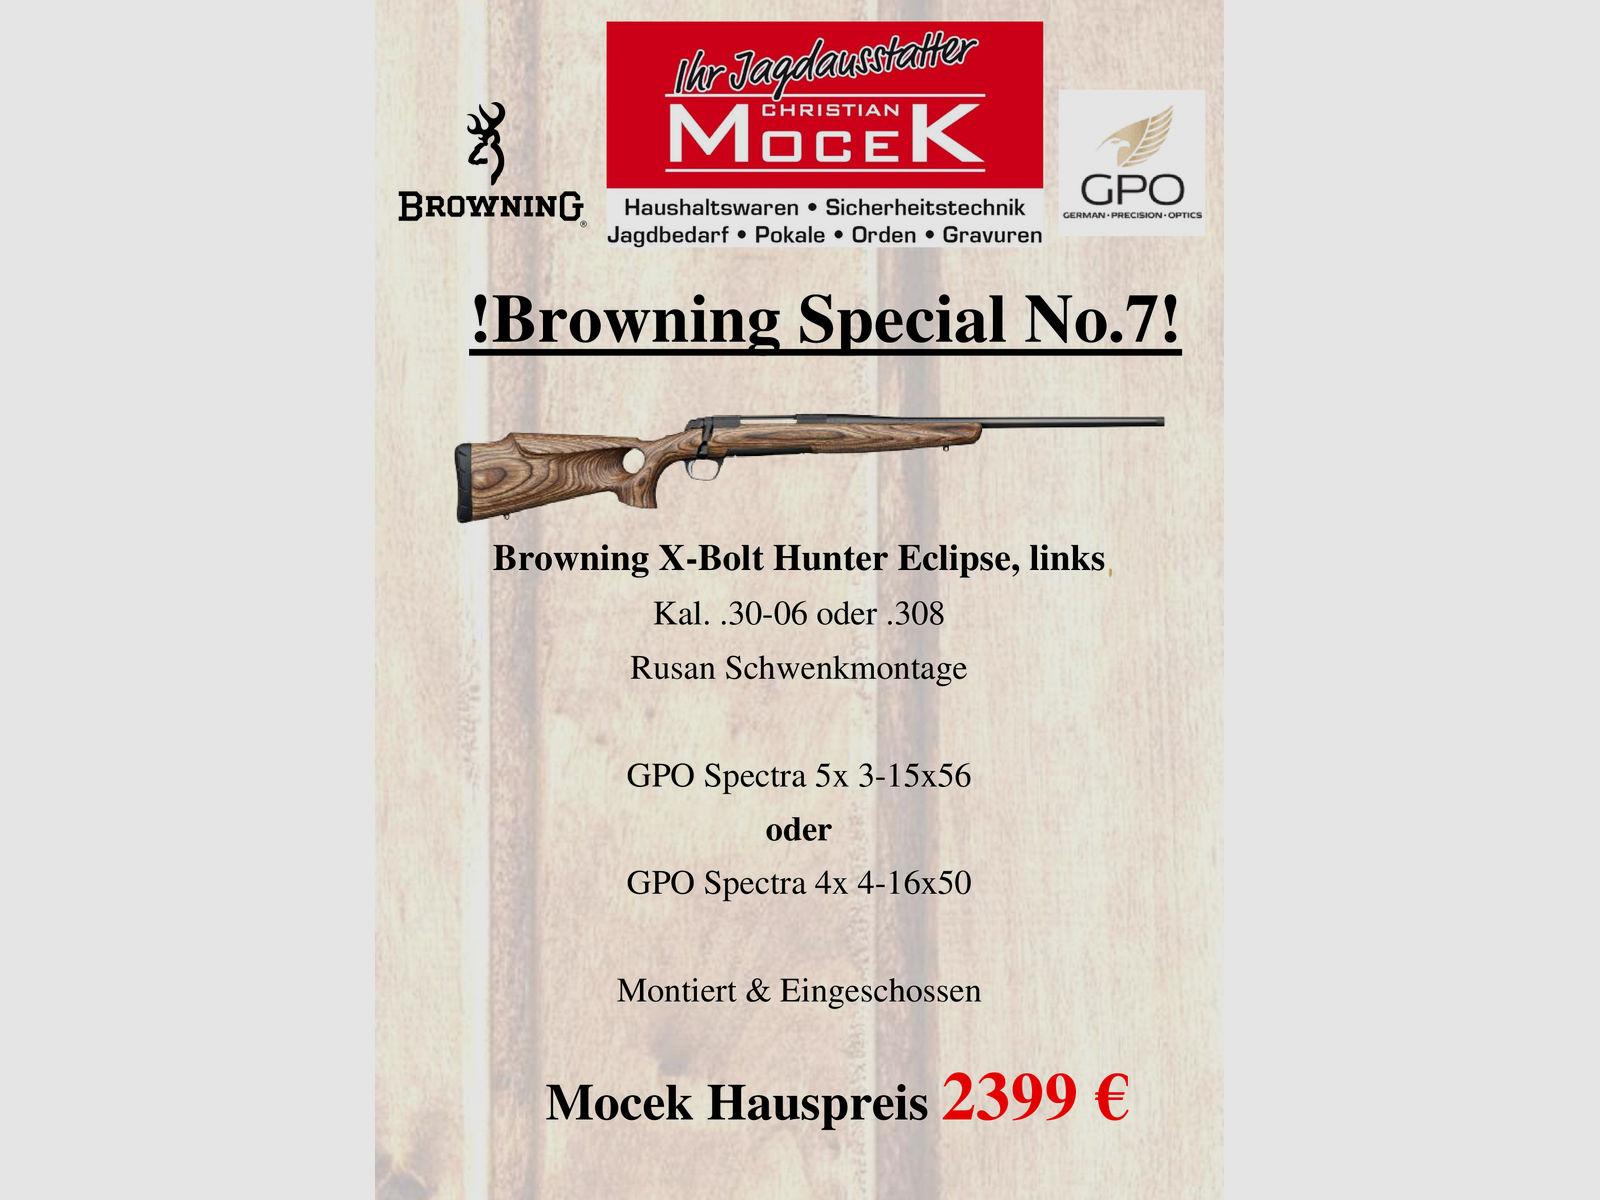 Browning X-Bolt Hunter Eclipse, mit GPO Spectra, links